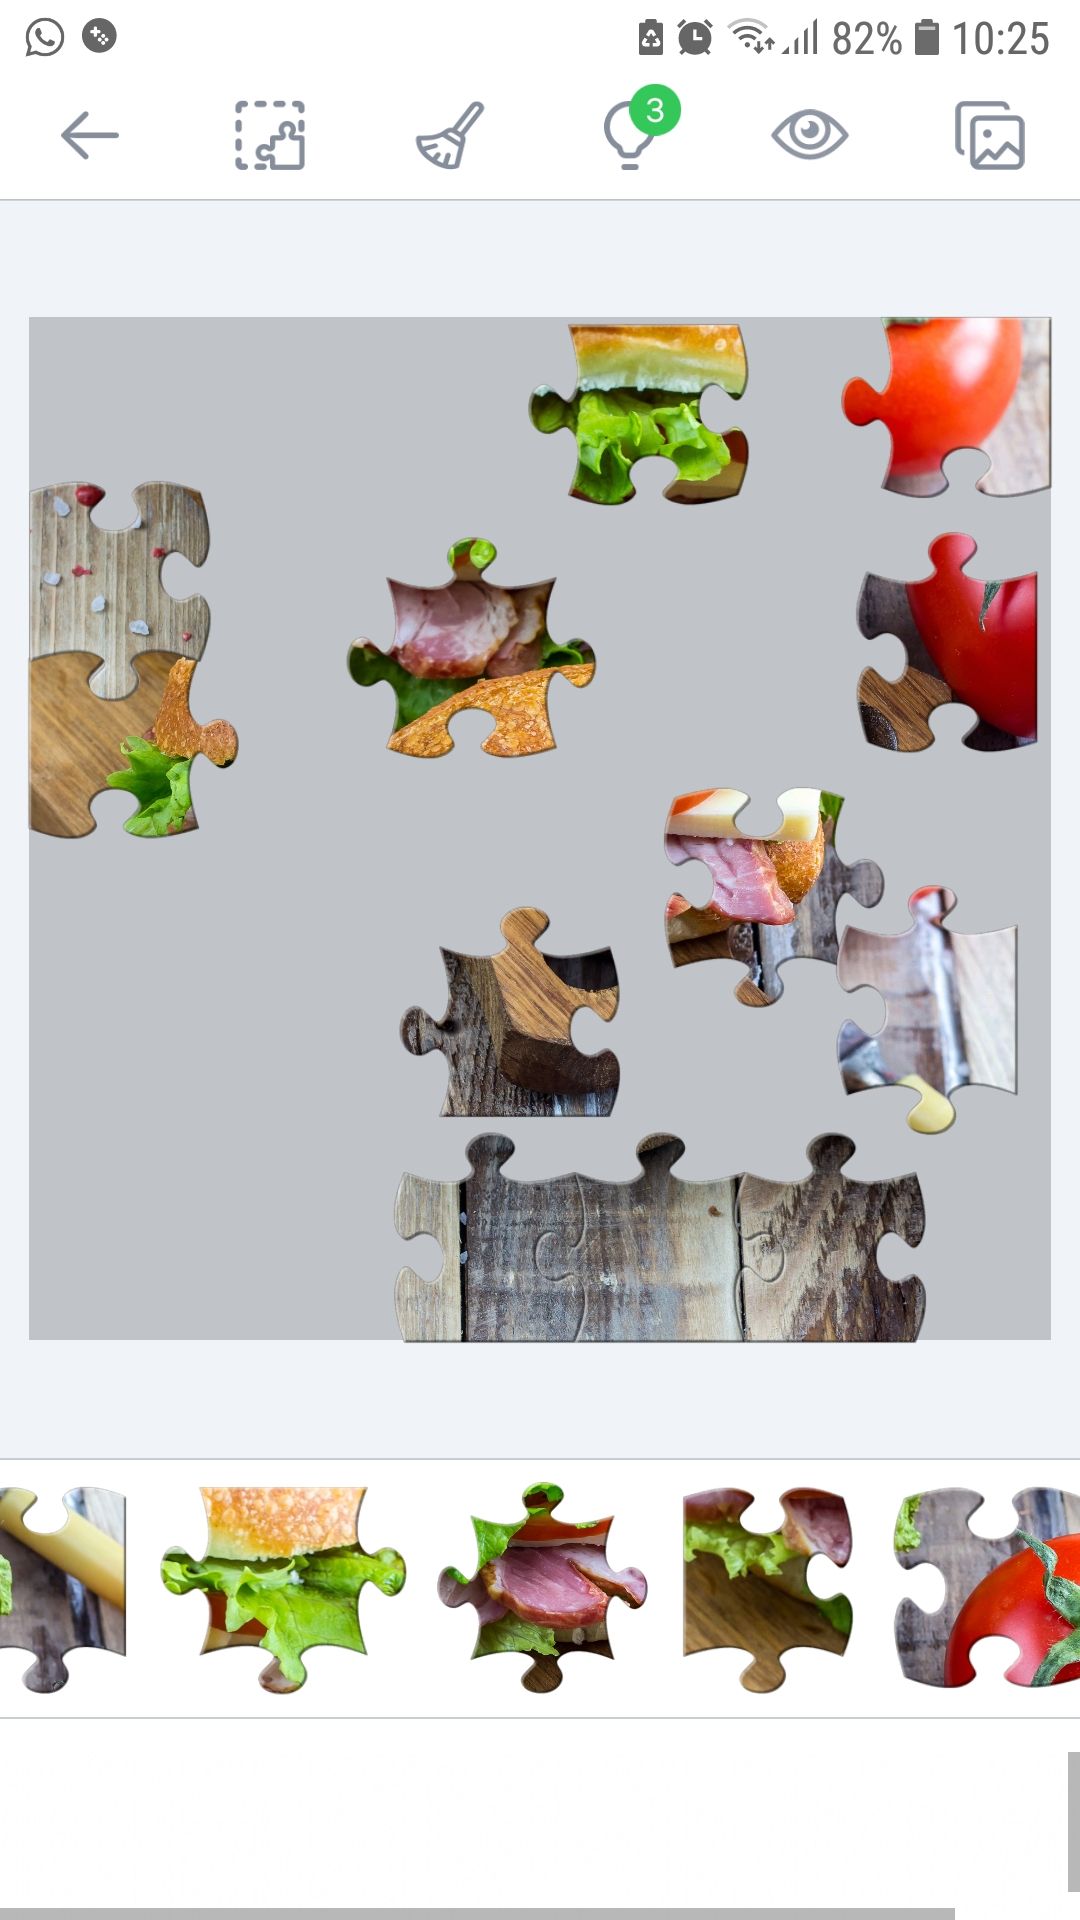 Jigsaw Puzzles calming mobile game